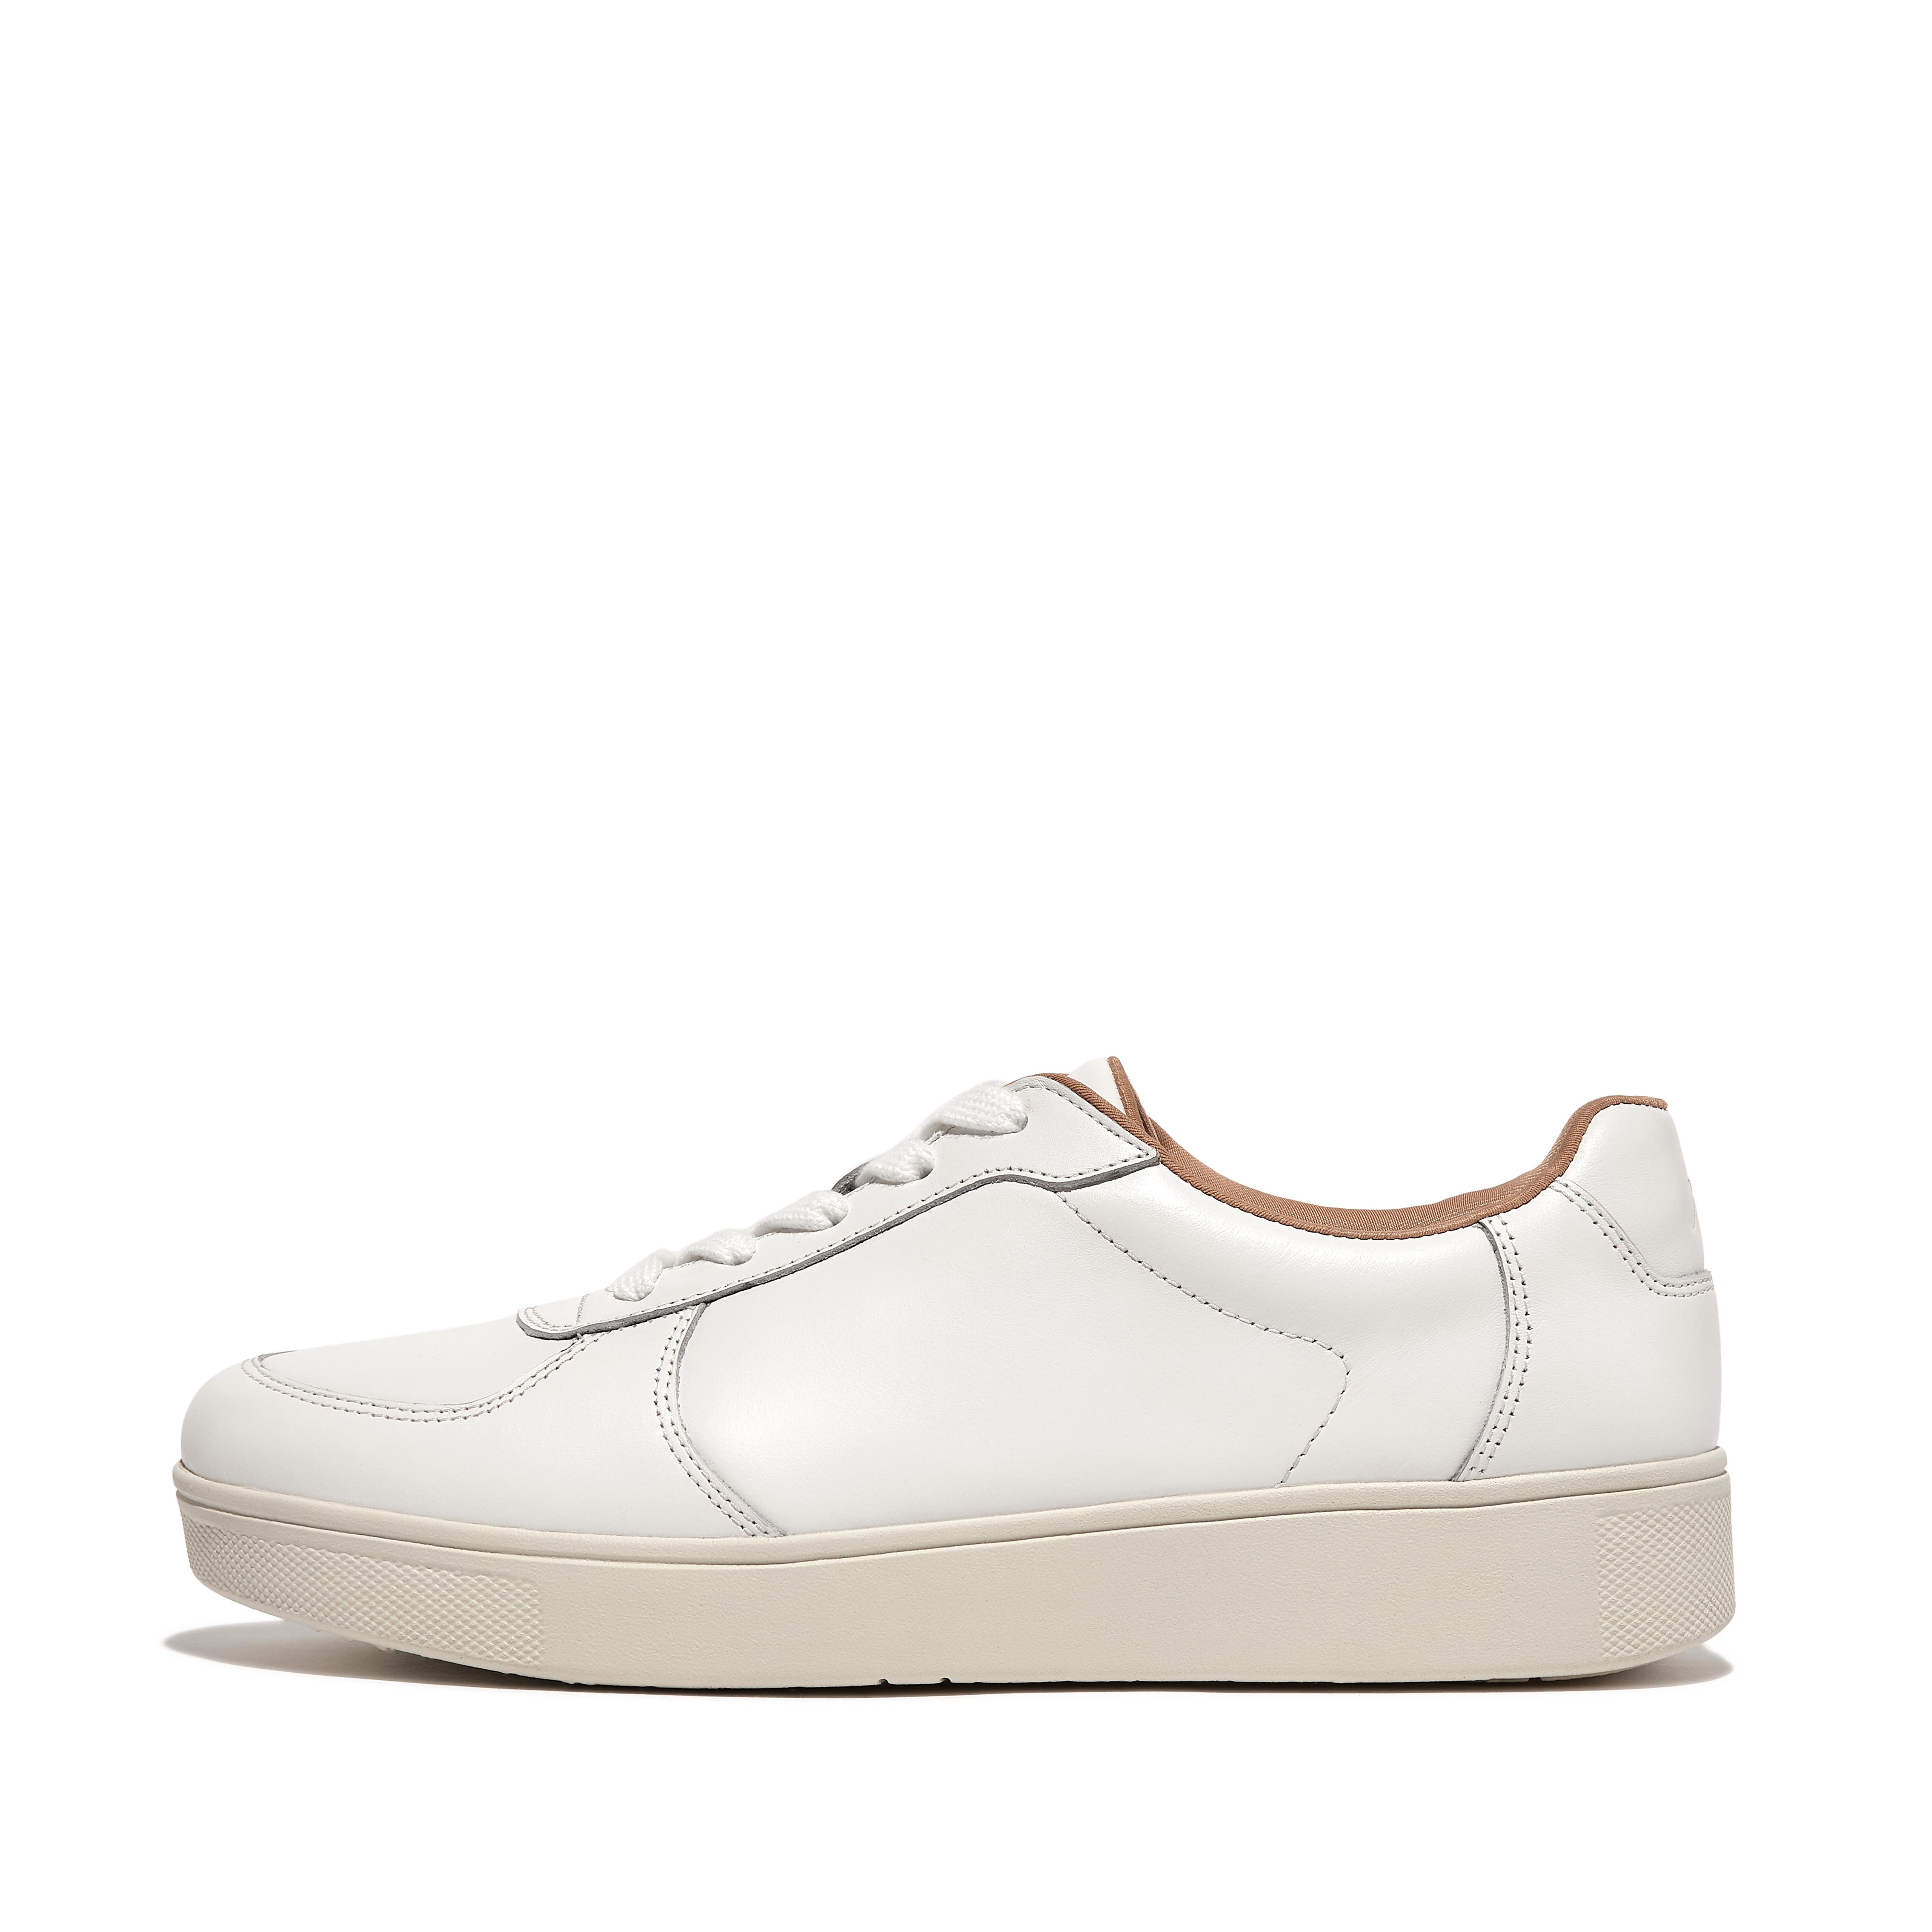 Fitflop Leather Panel Sneakers